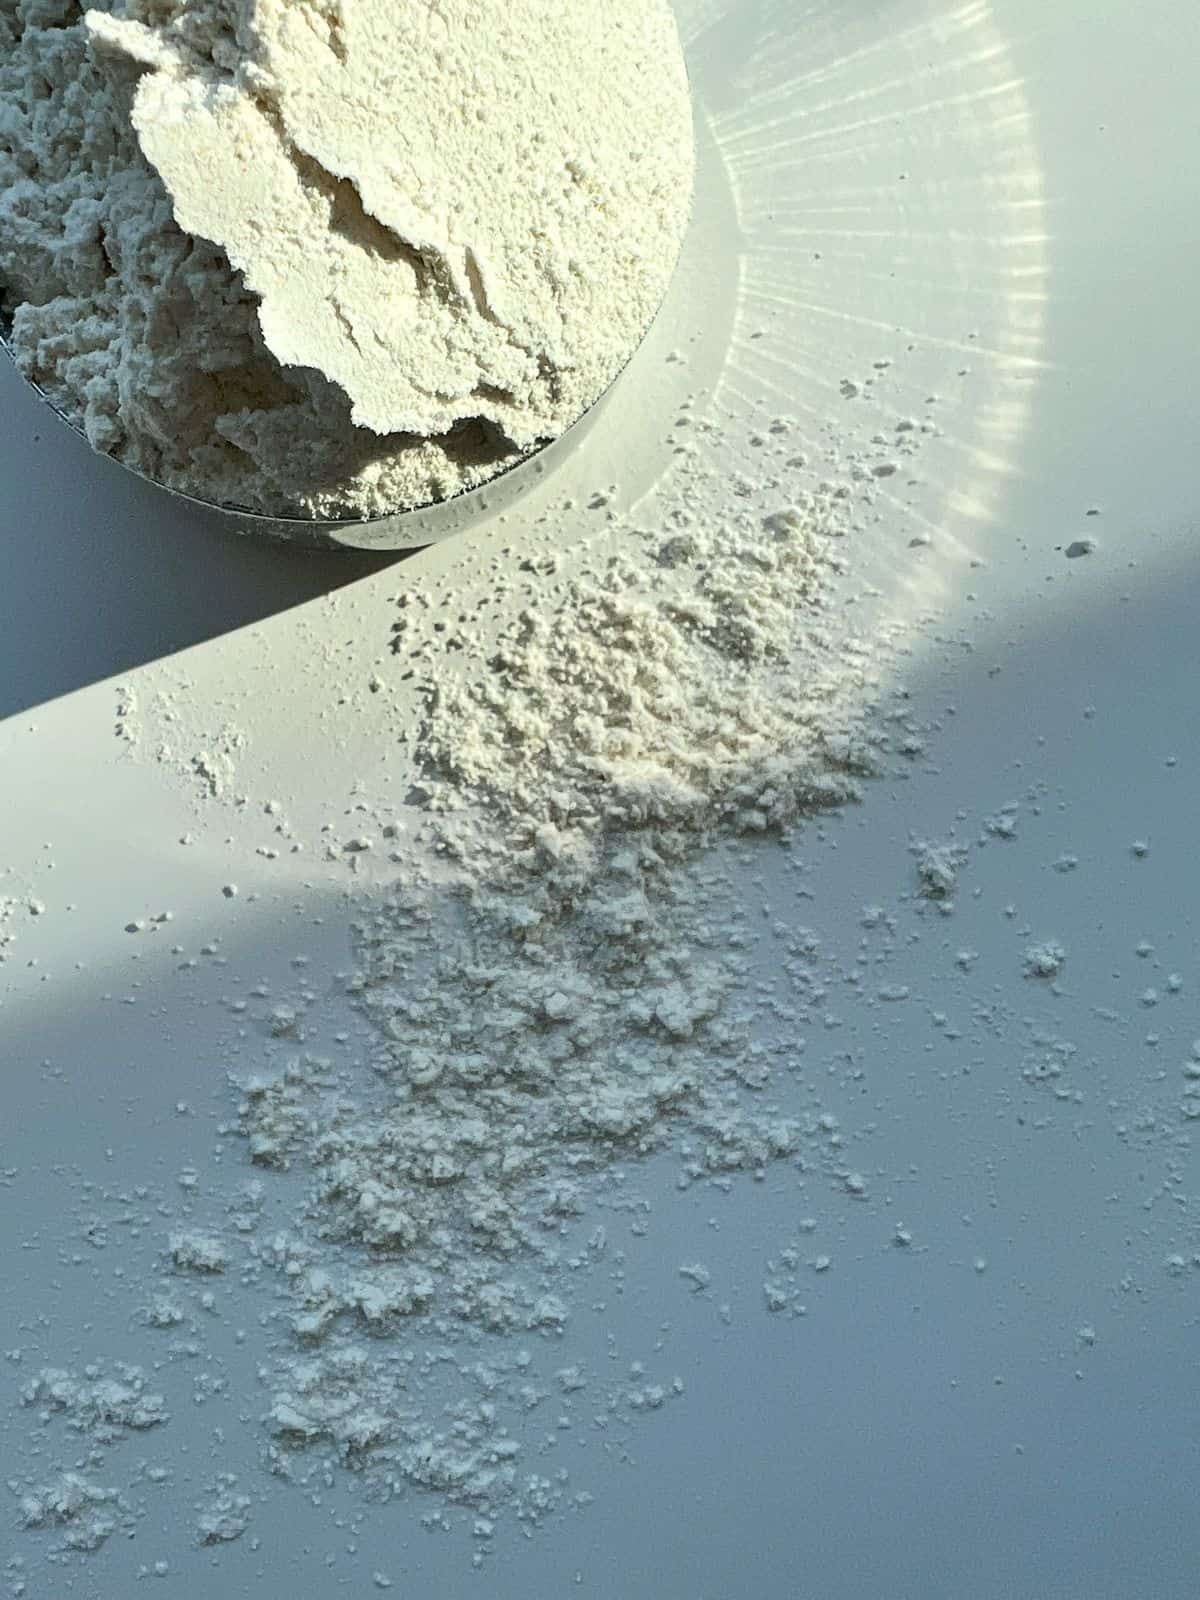 A close up image of a cup of whole wheat pastry flour showing the texture of the flour.